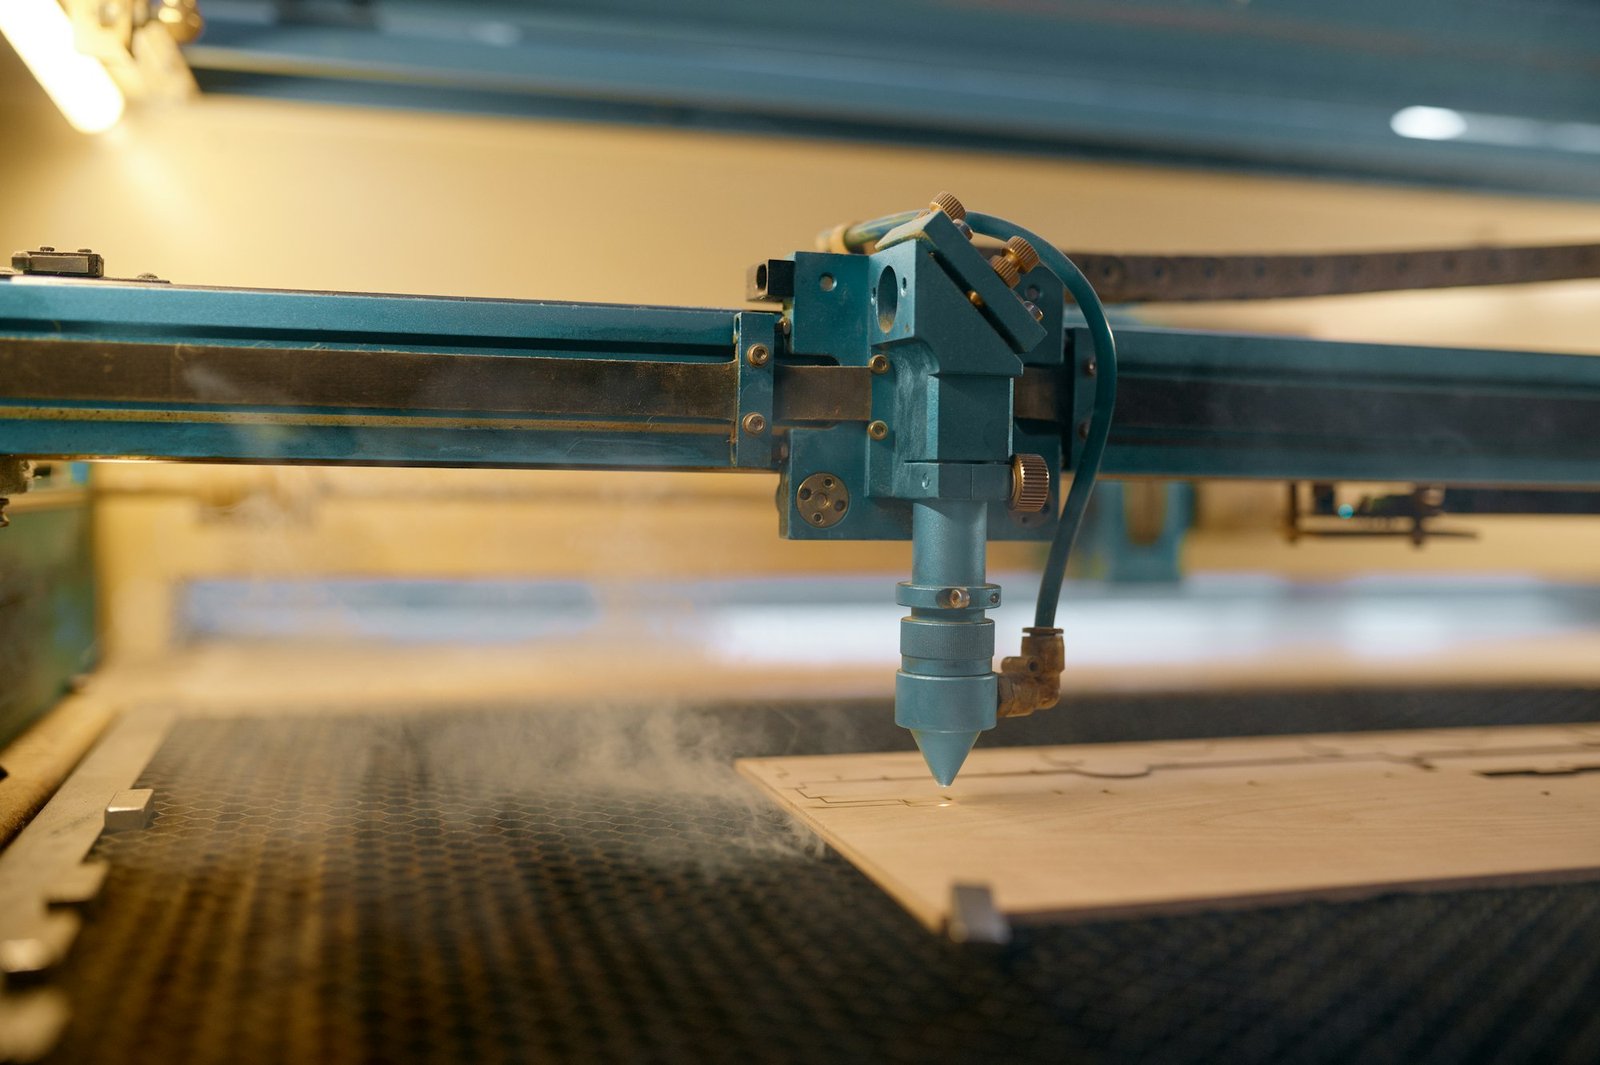 Closeup automated CNC laser machine operating with wooden plank